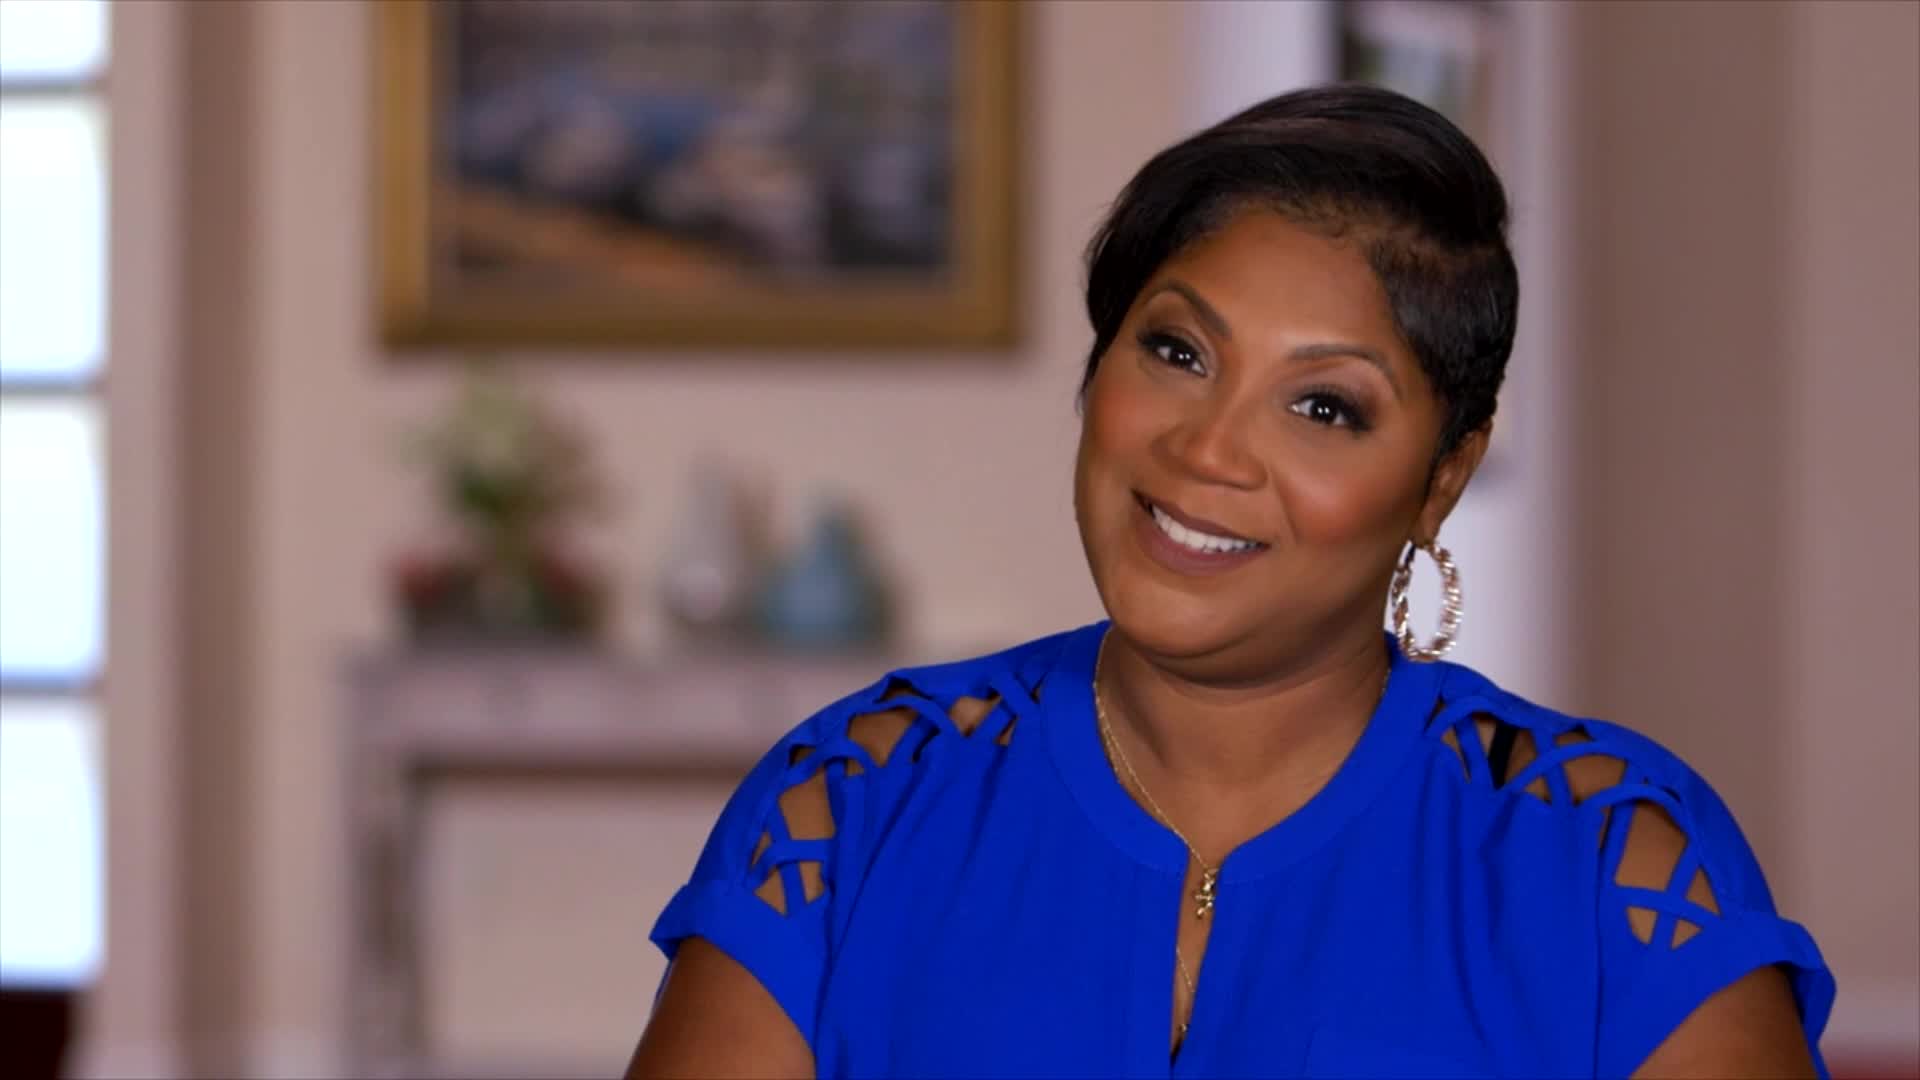 Trina Braxton Impresses Fans With Photos Of Her Thanksgiving Meals